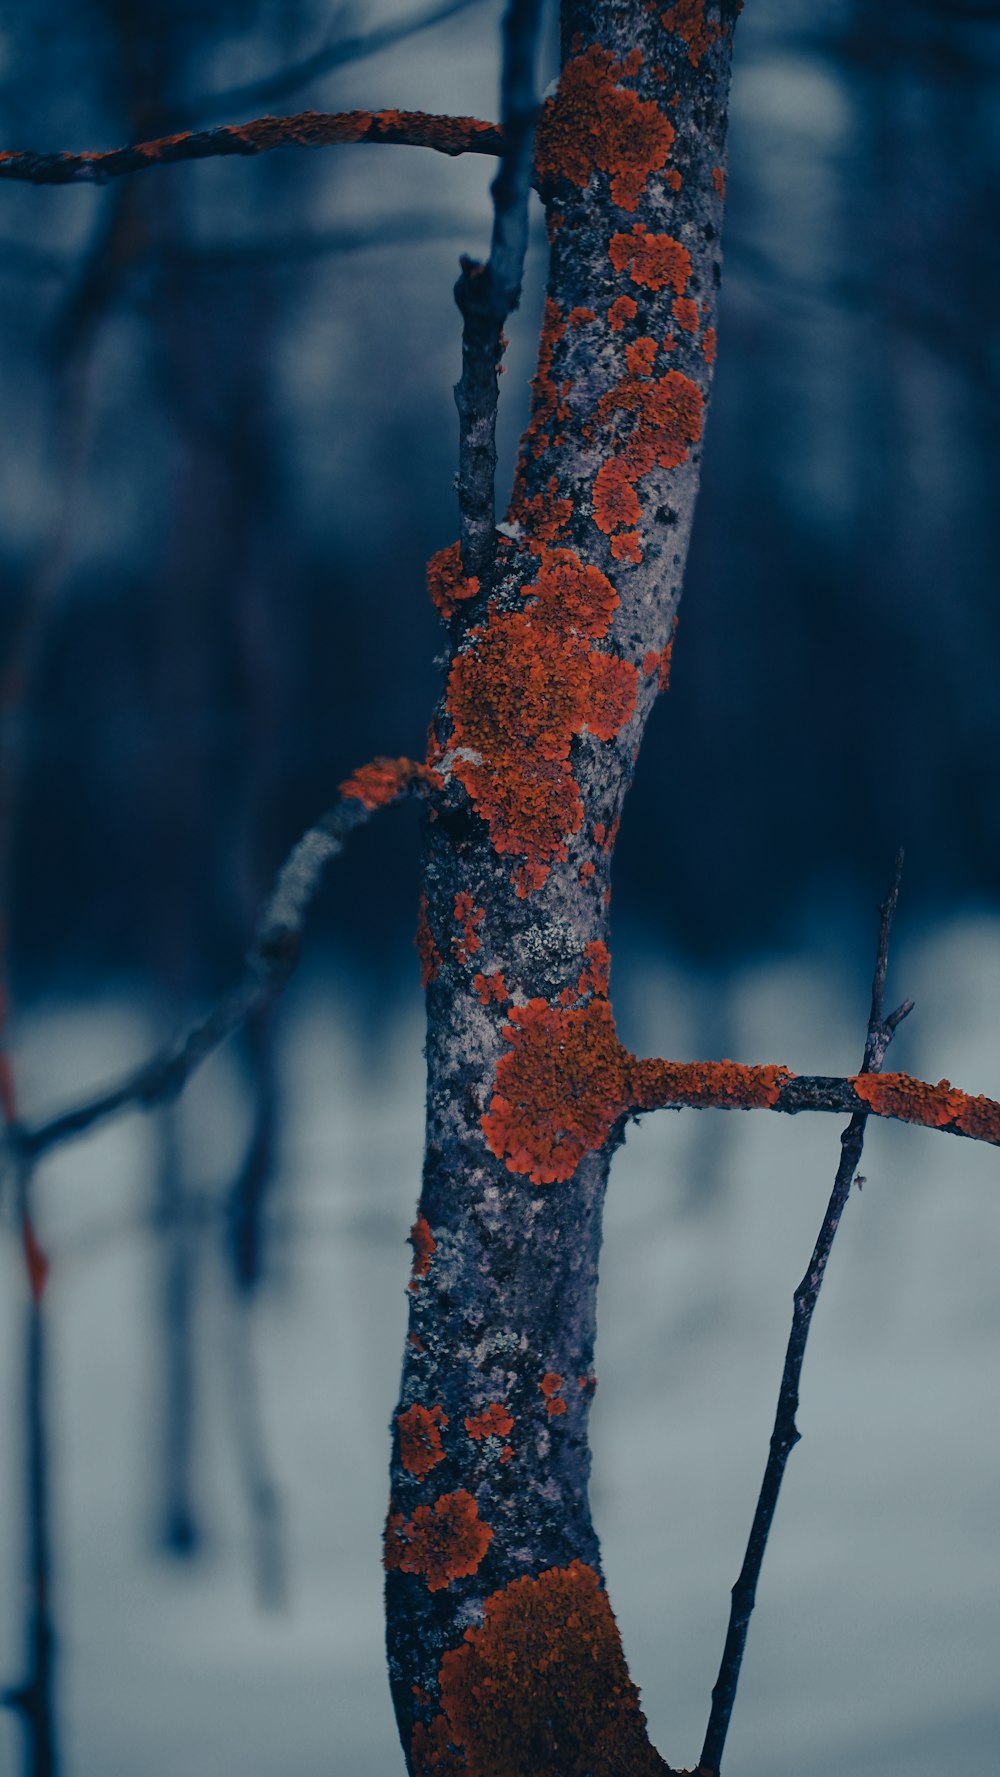 a tree with red moss growing on it